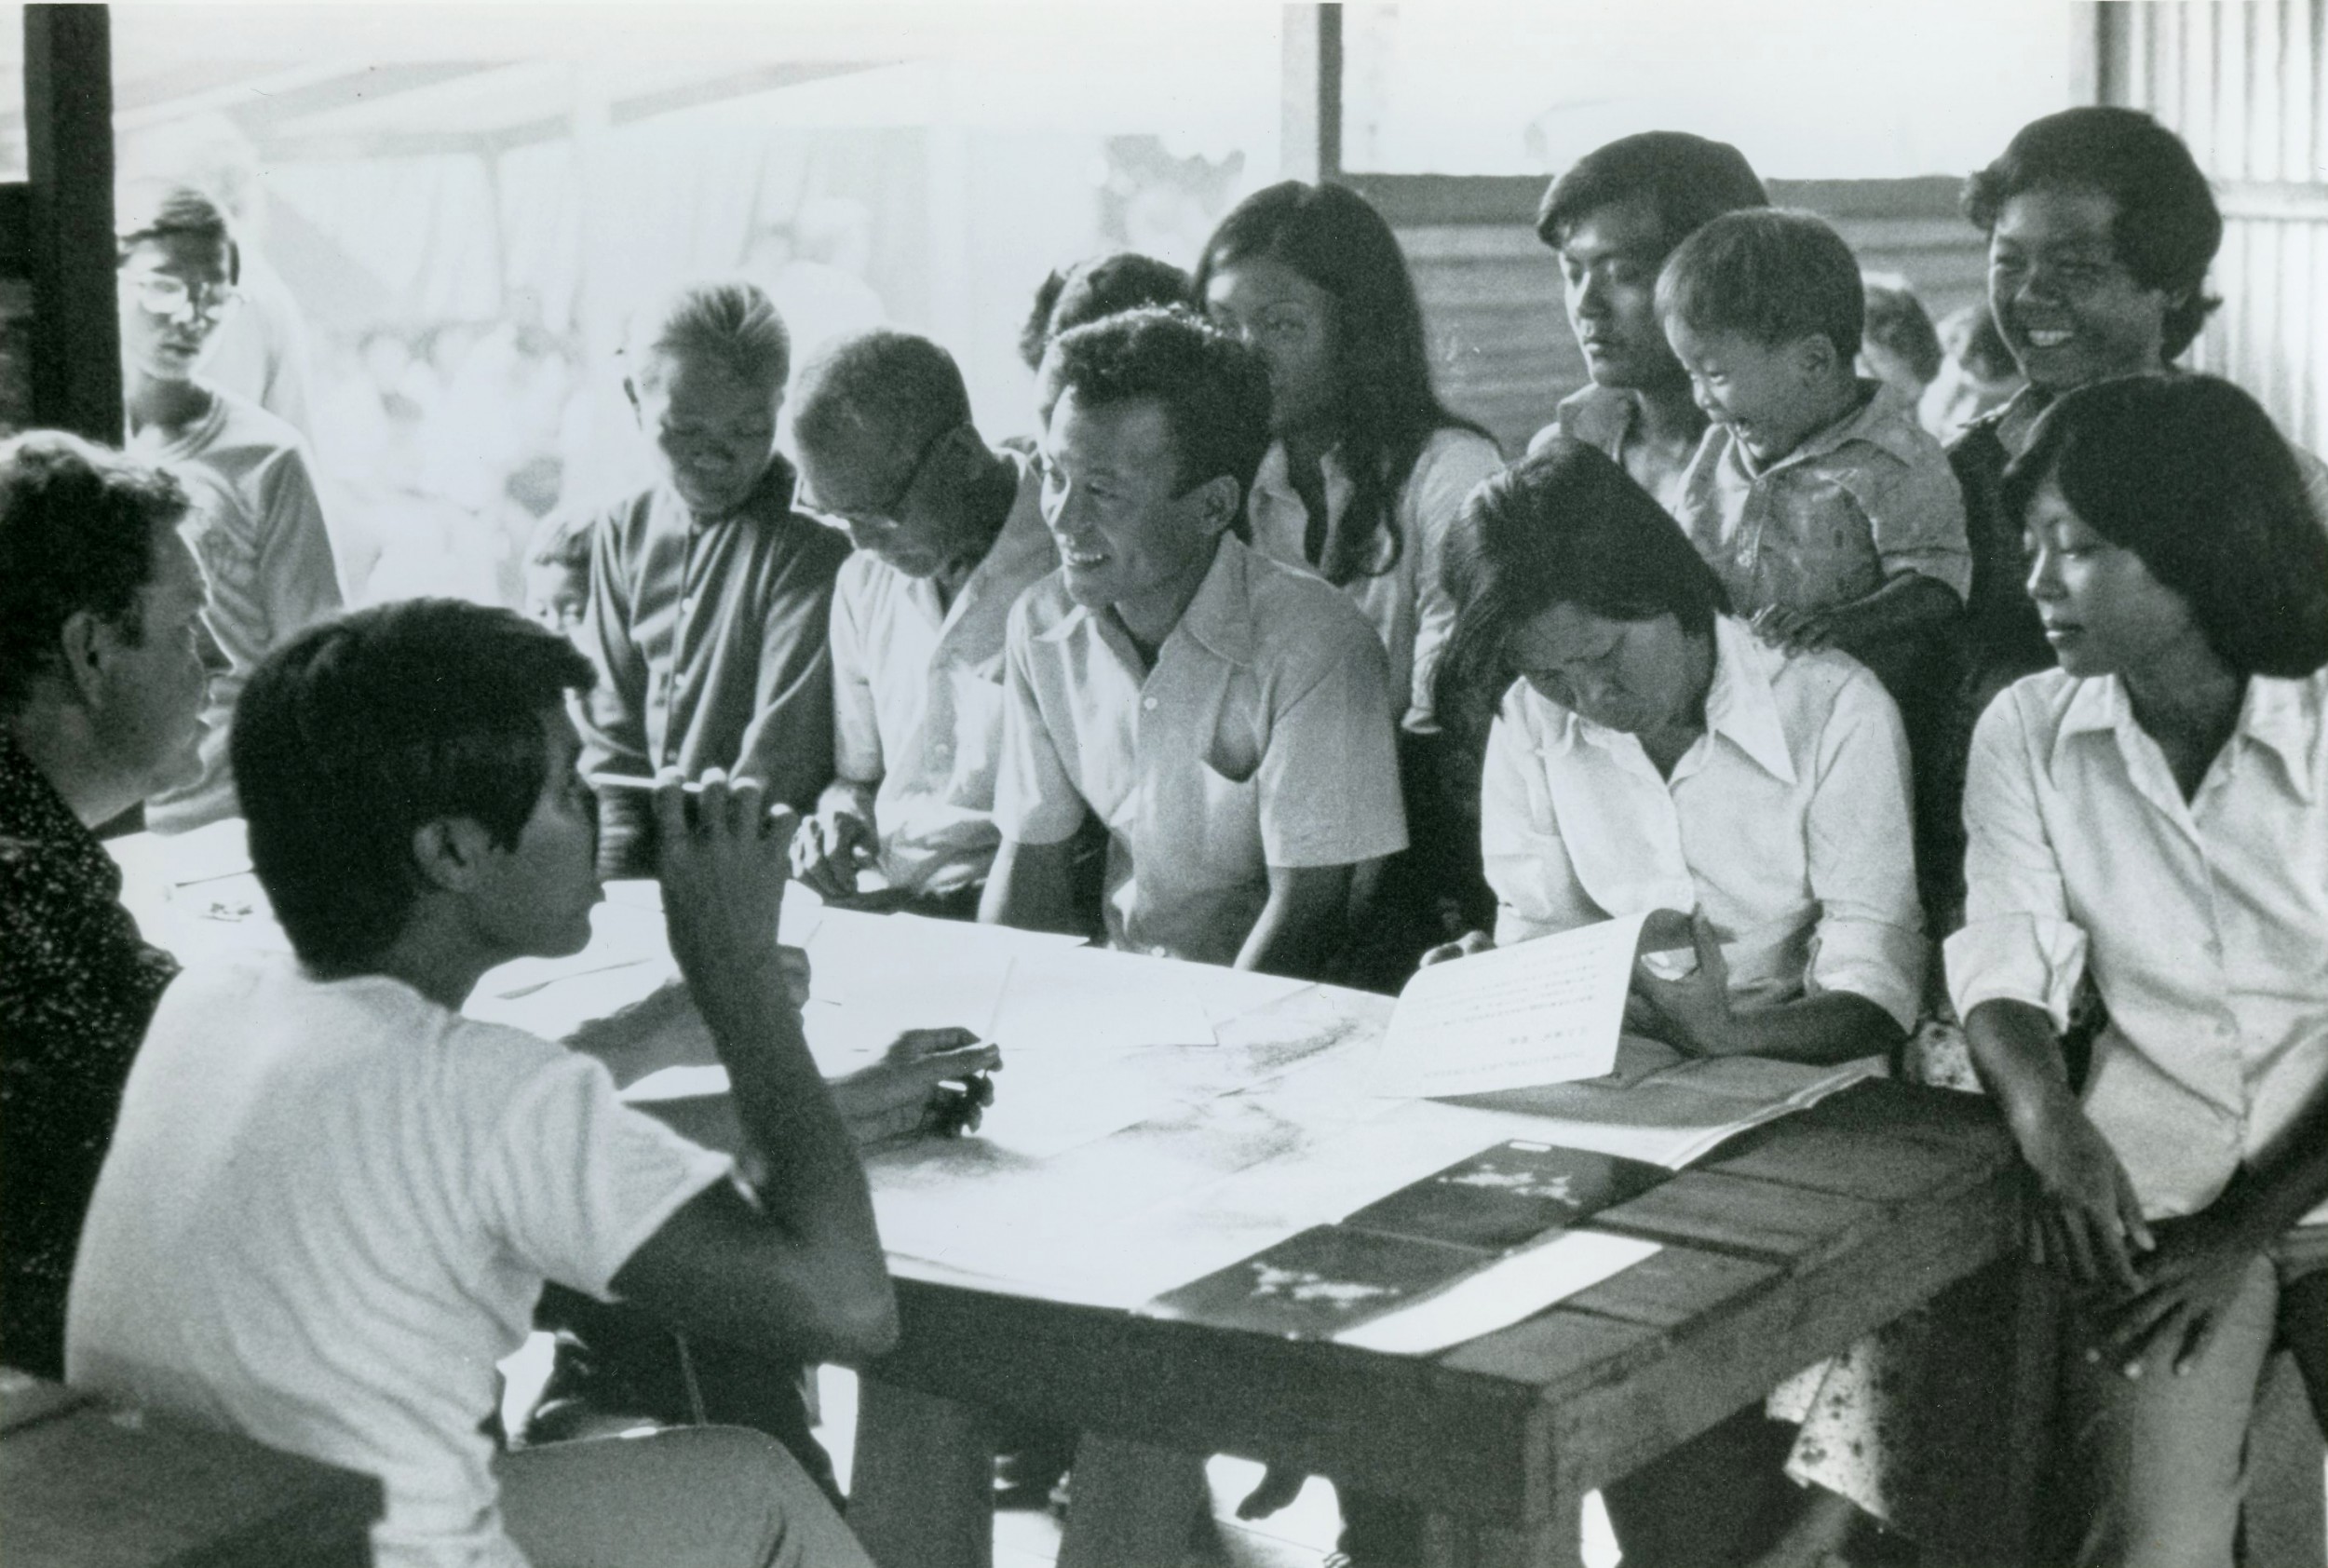  Refugees processing table in refugee camp (Photo Credit: CIHS Collection)